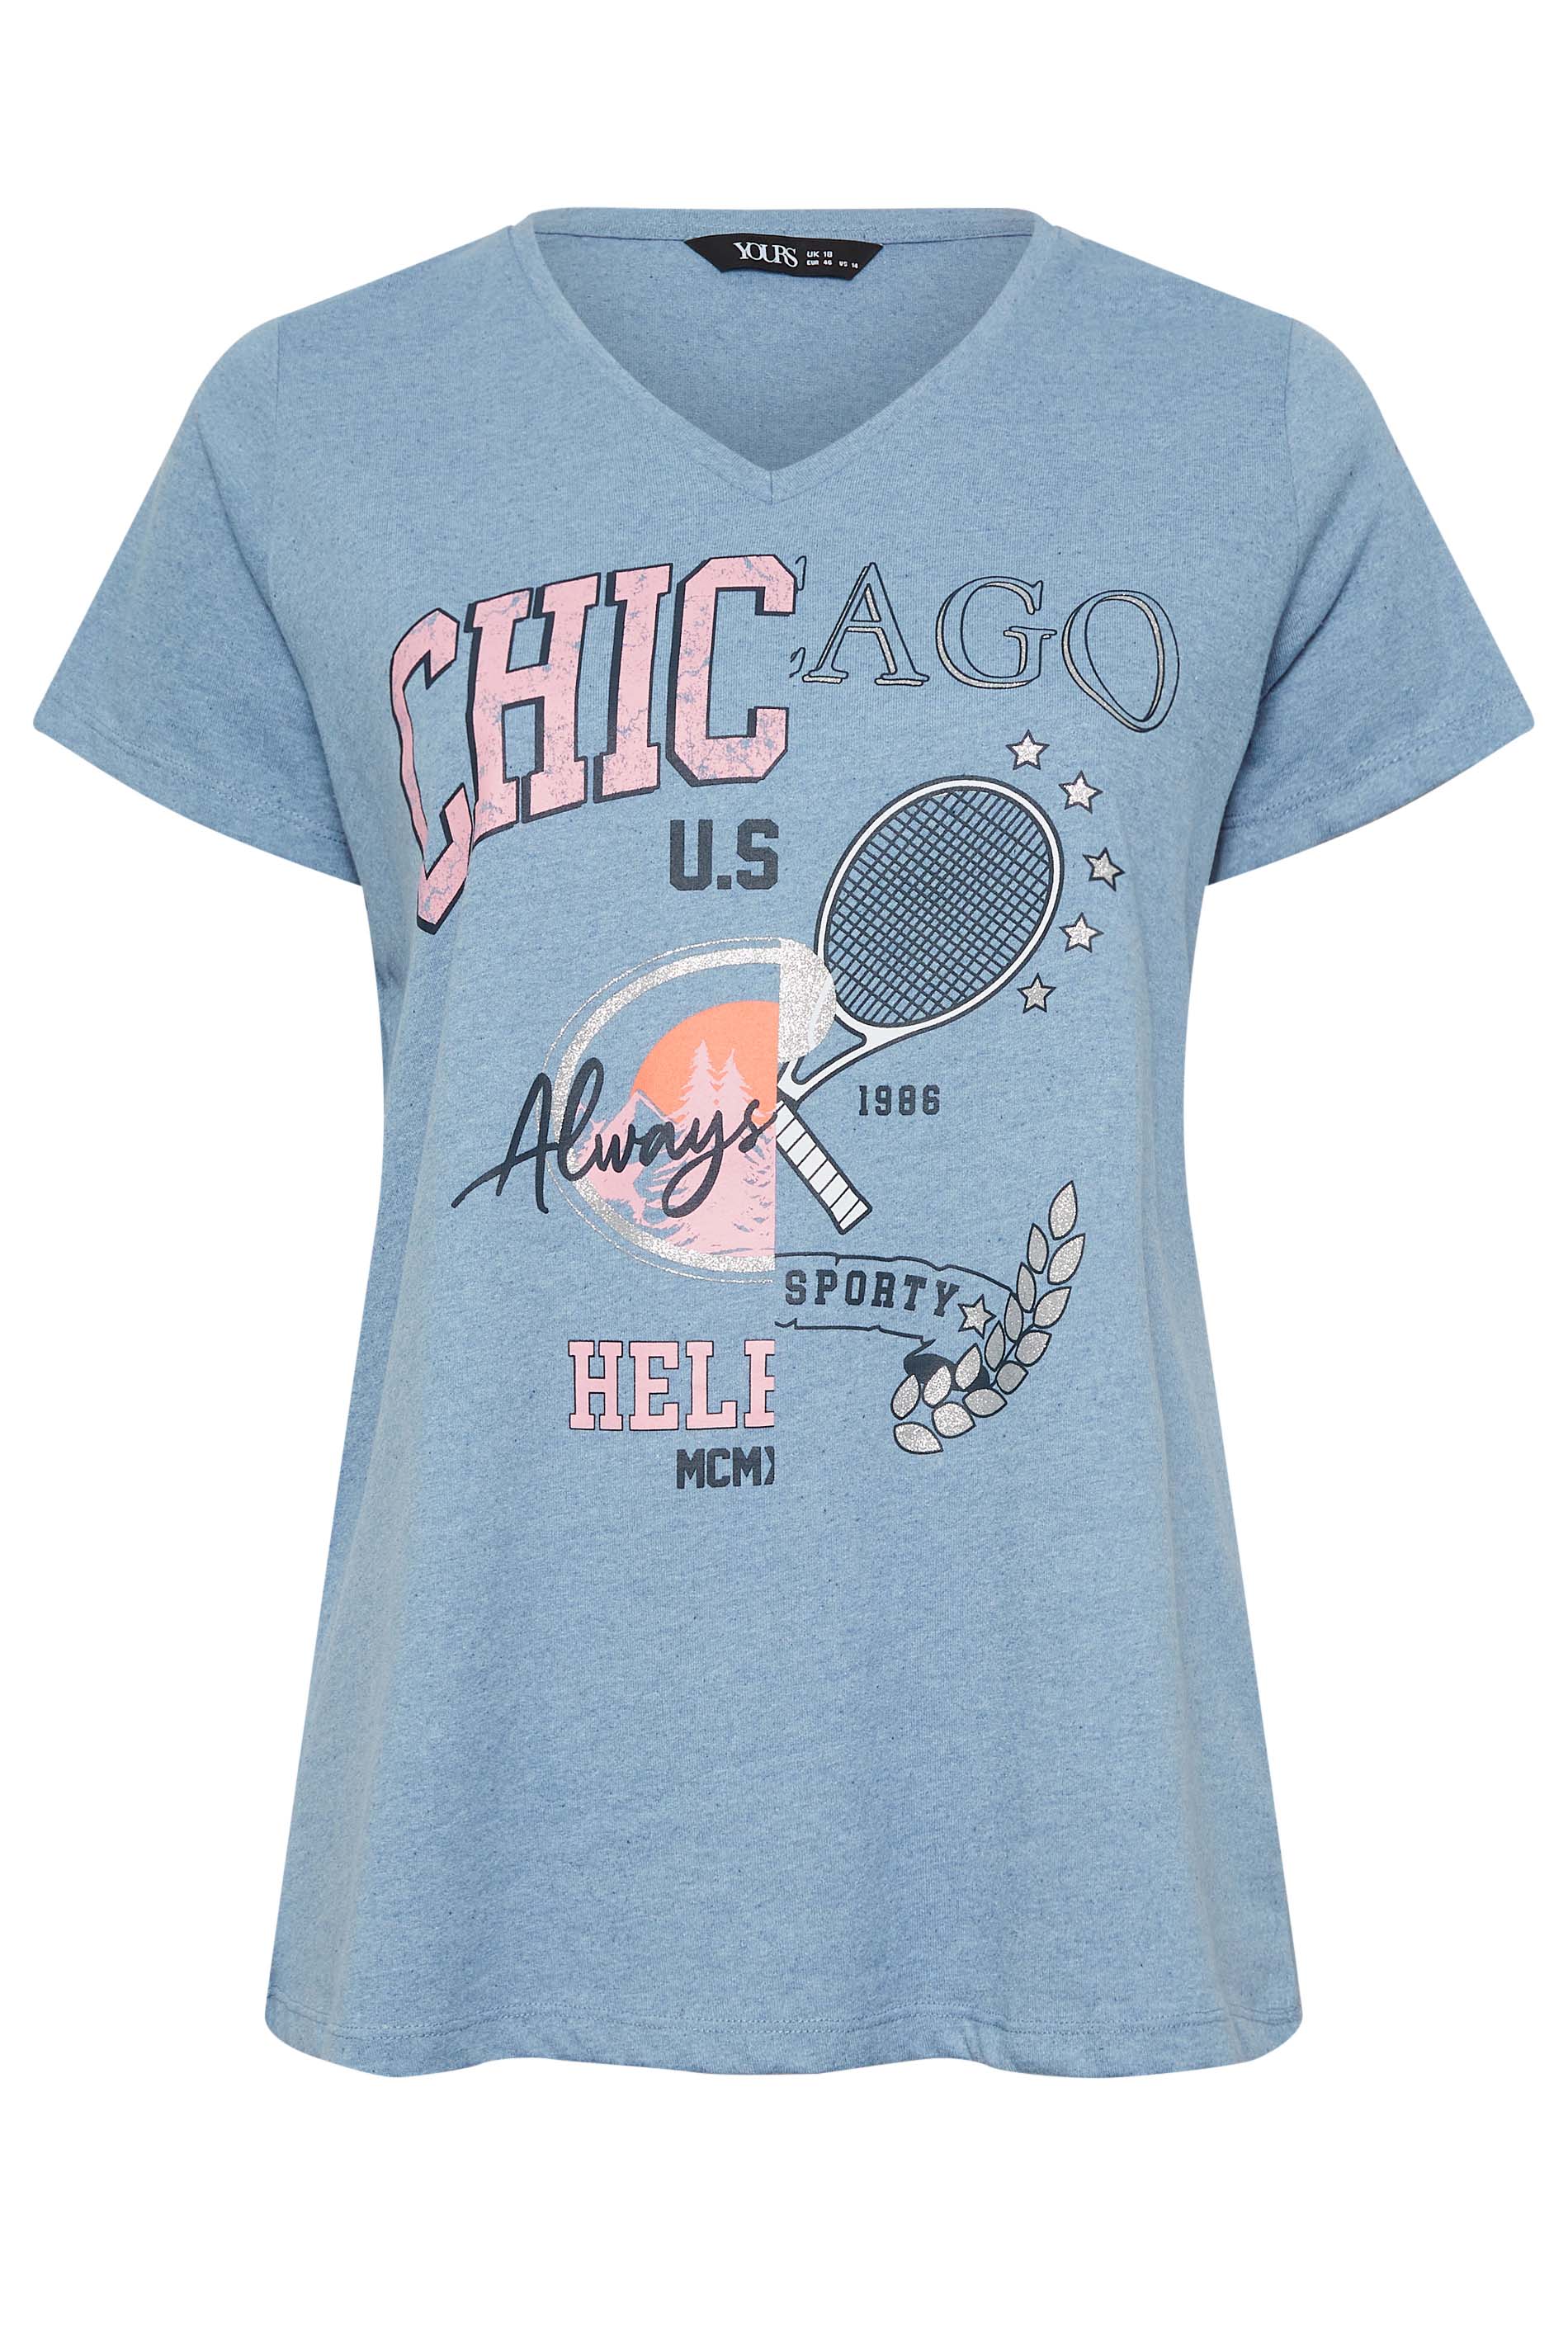 Yours Curve Blue 'Chicago' Printed Vneck Tshirt Size 14 | Women's Plus Size and Curve Fashion